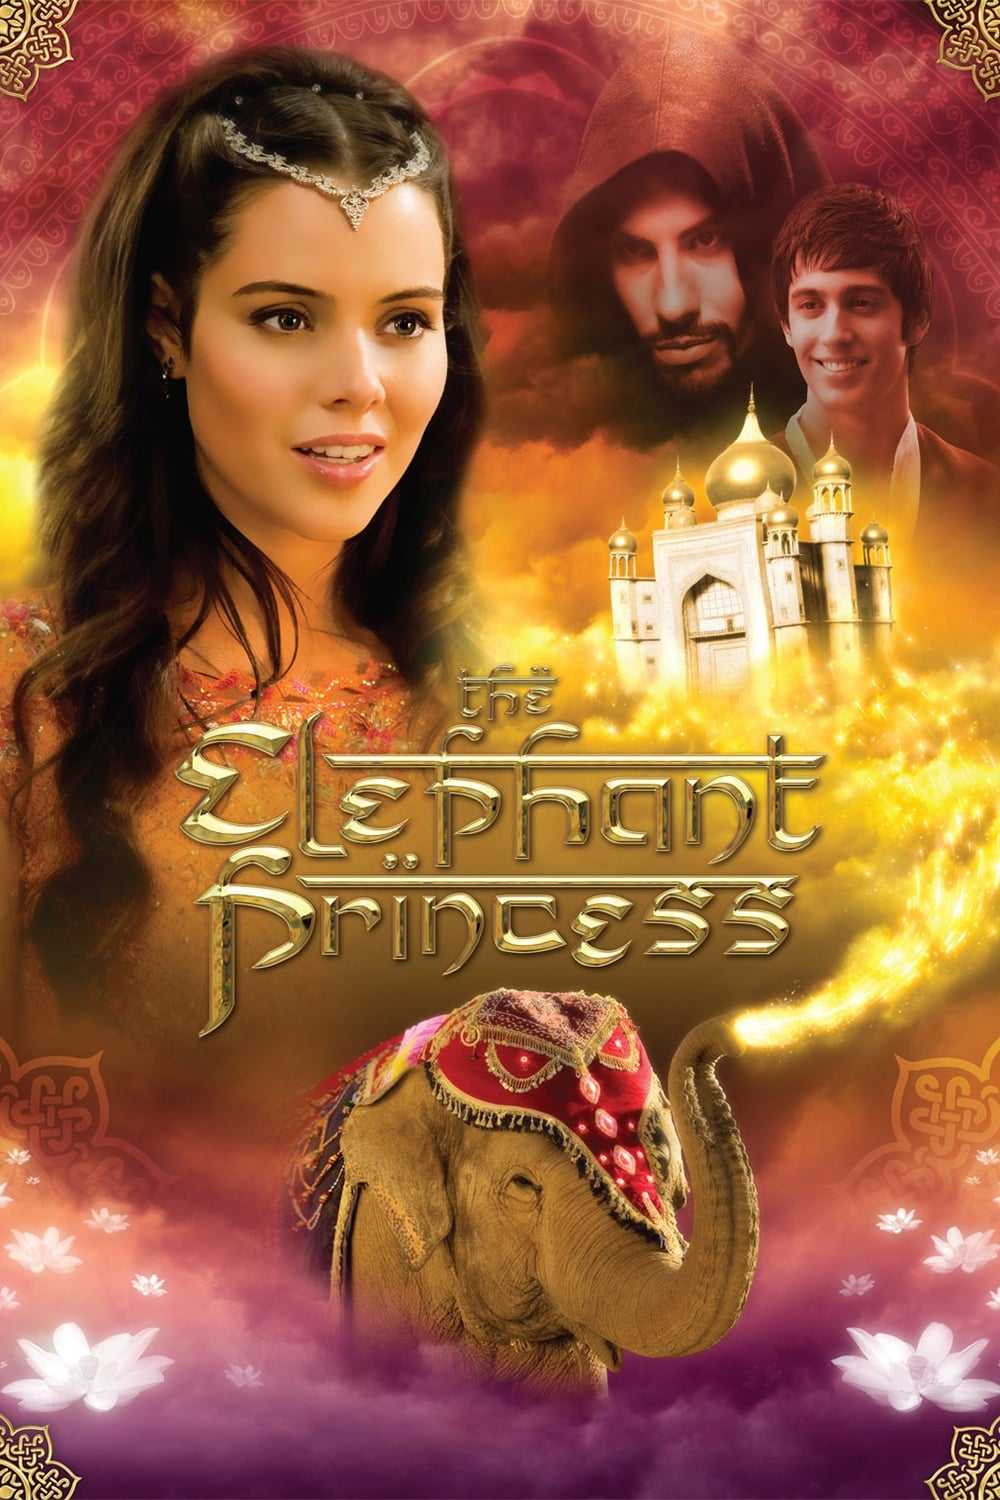 The Elephant Princess in streaming